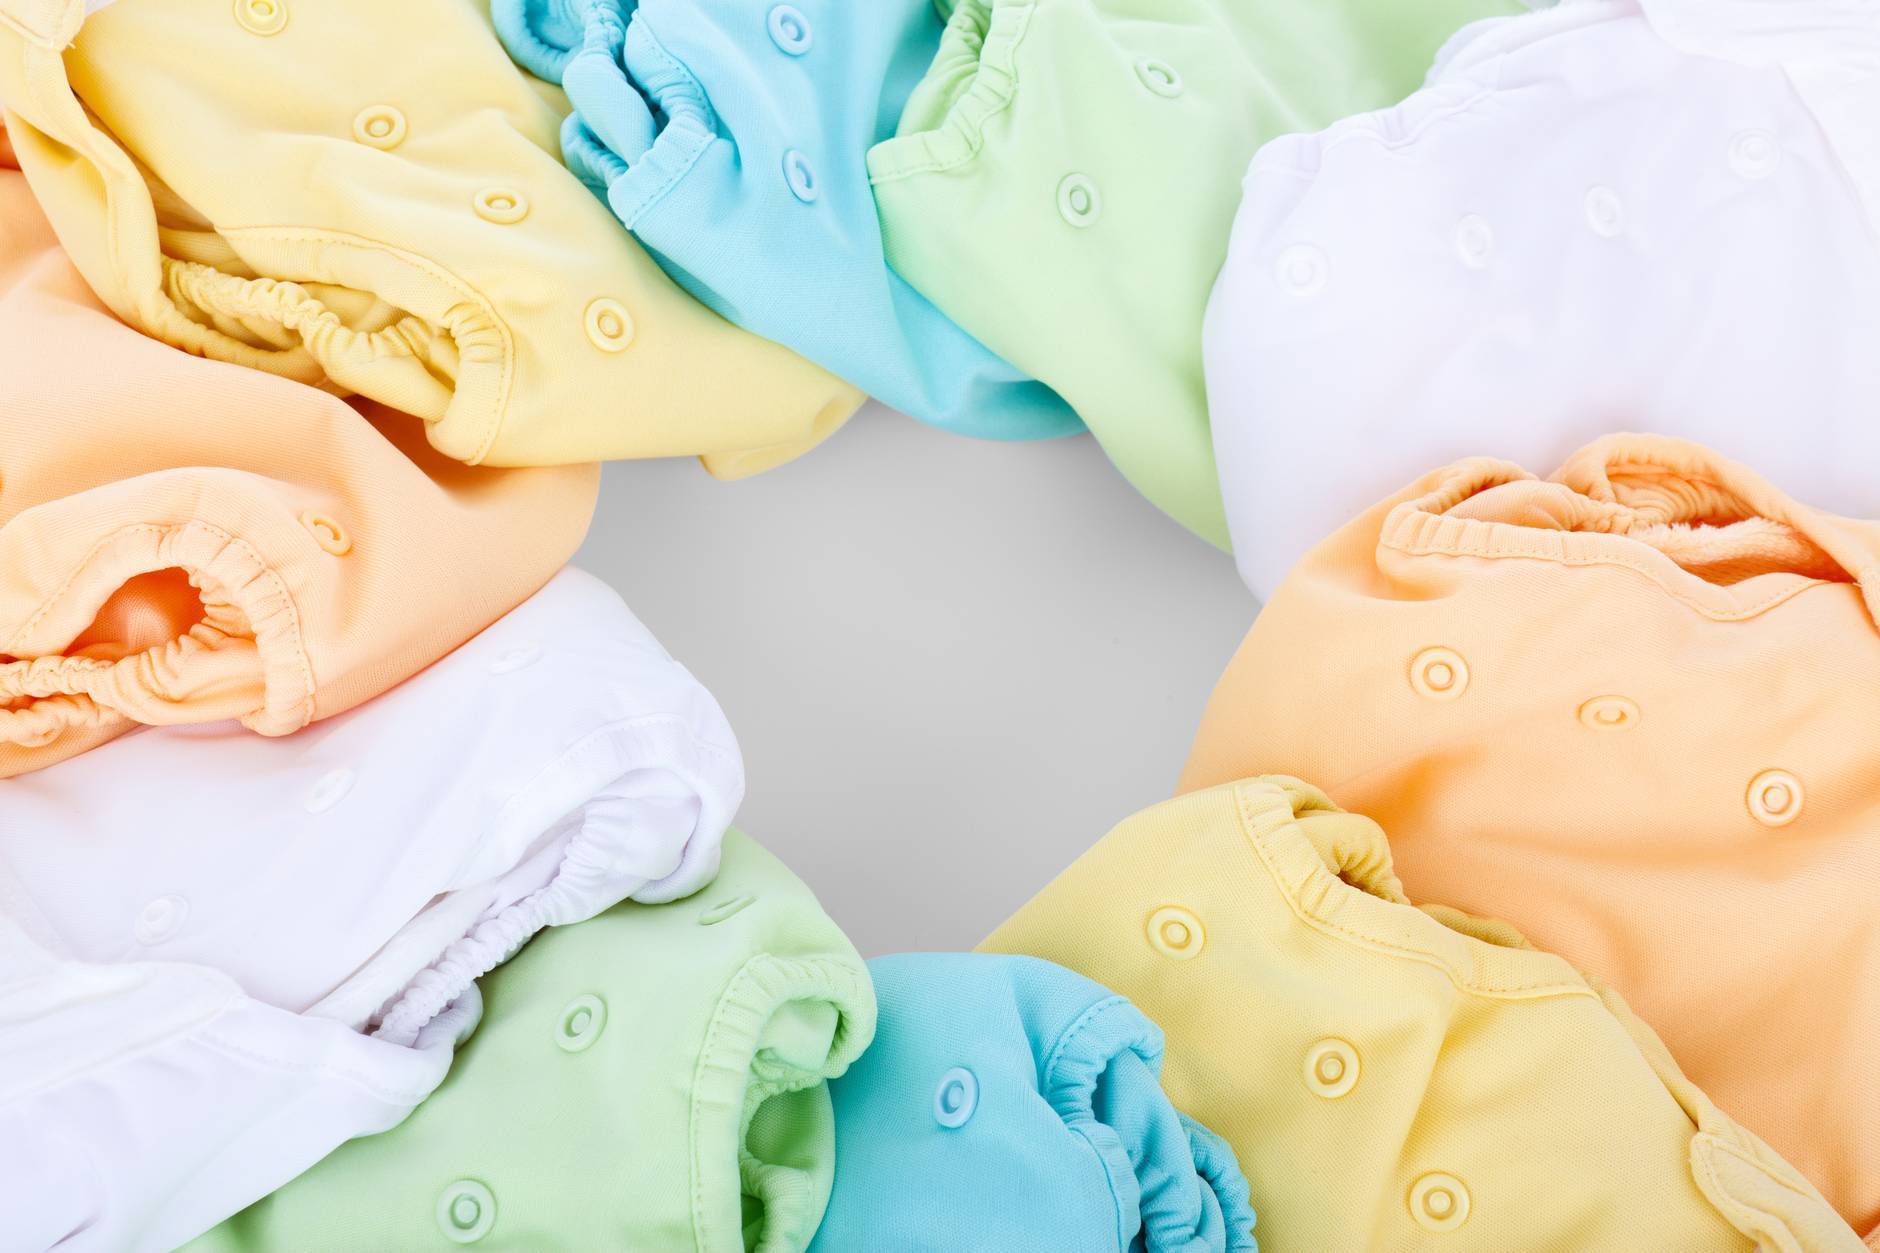 Are You Considering Cloth Diapers For Your Baby